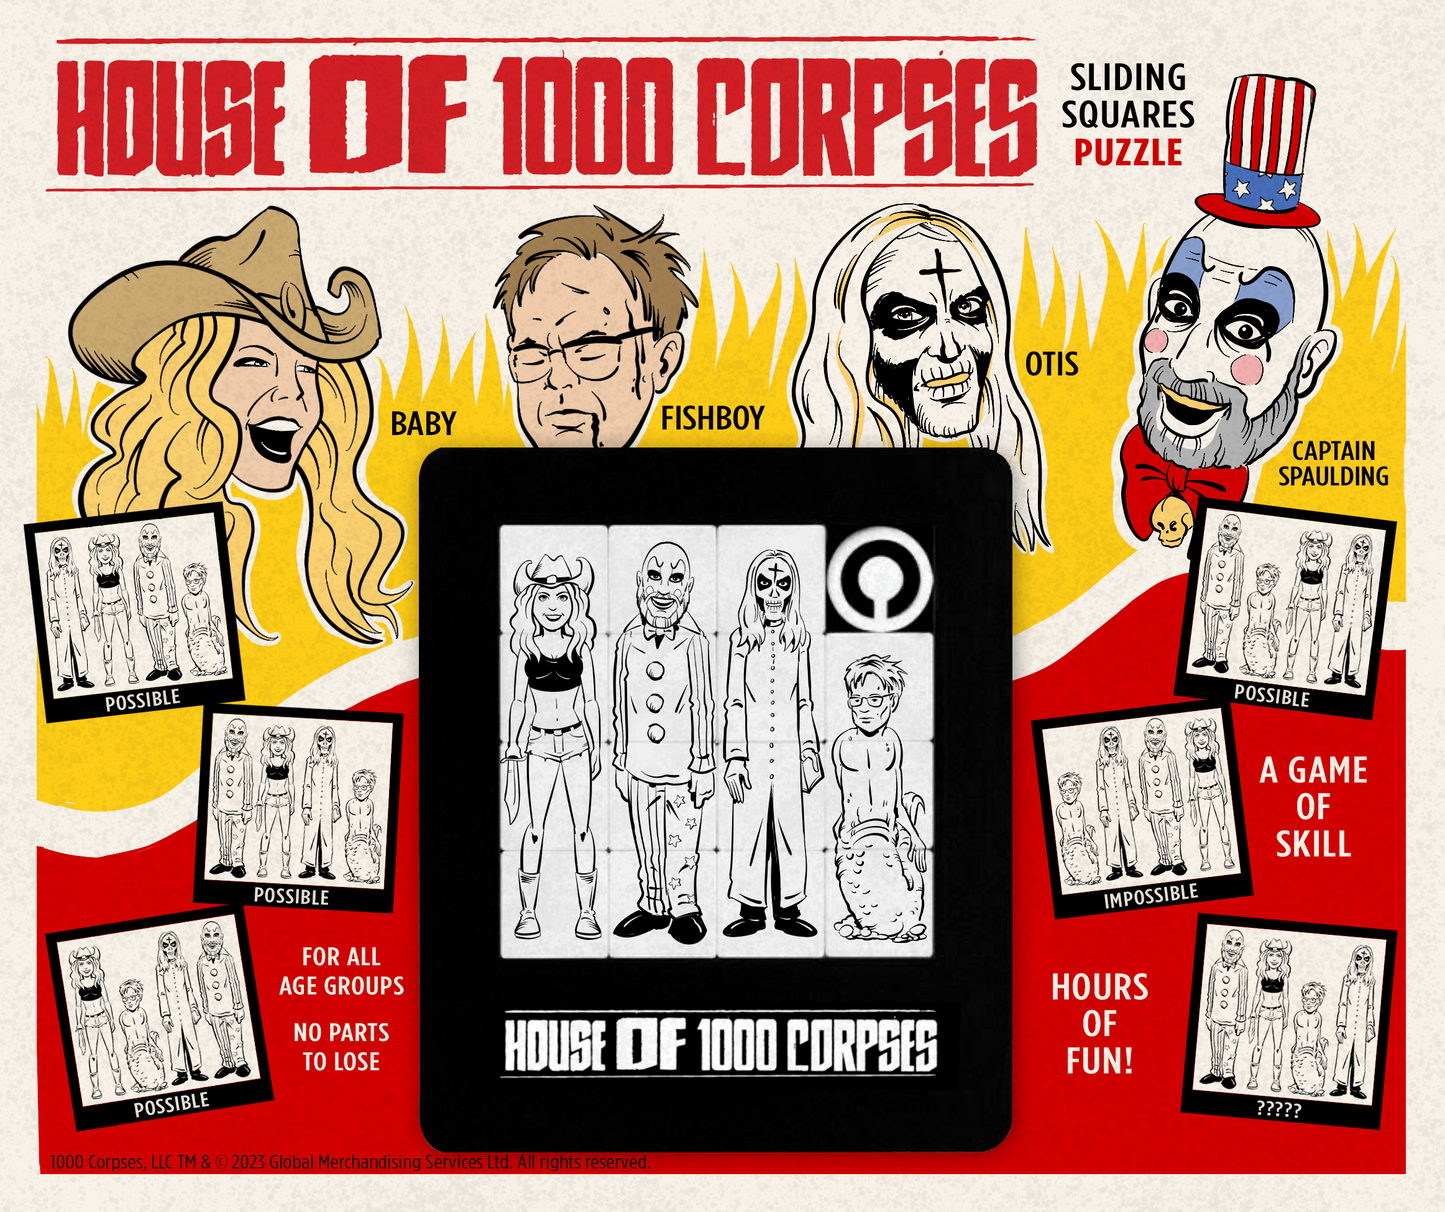 House Of 1000 Corpses Slide Puzzle